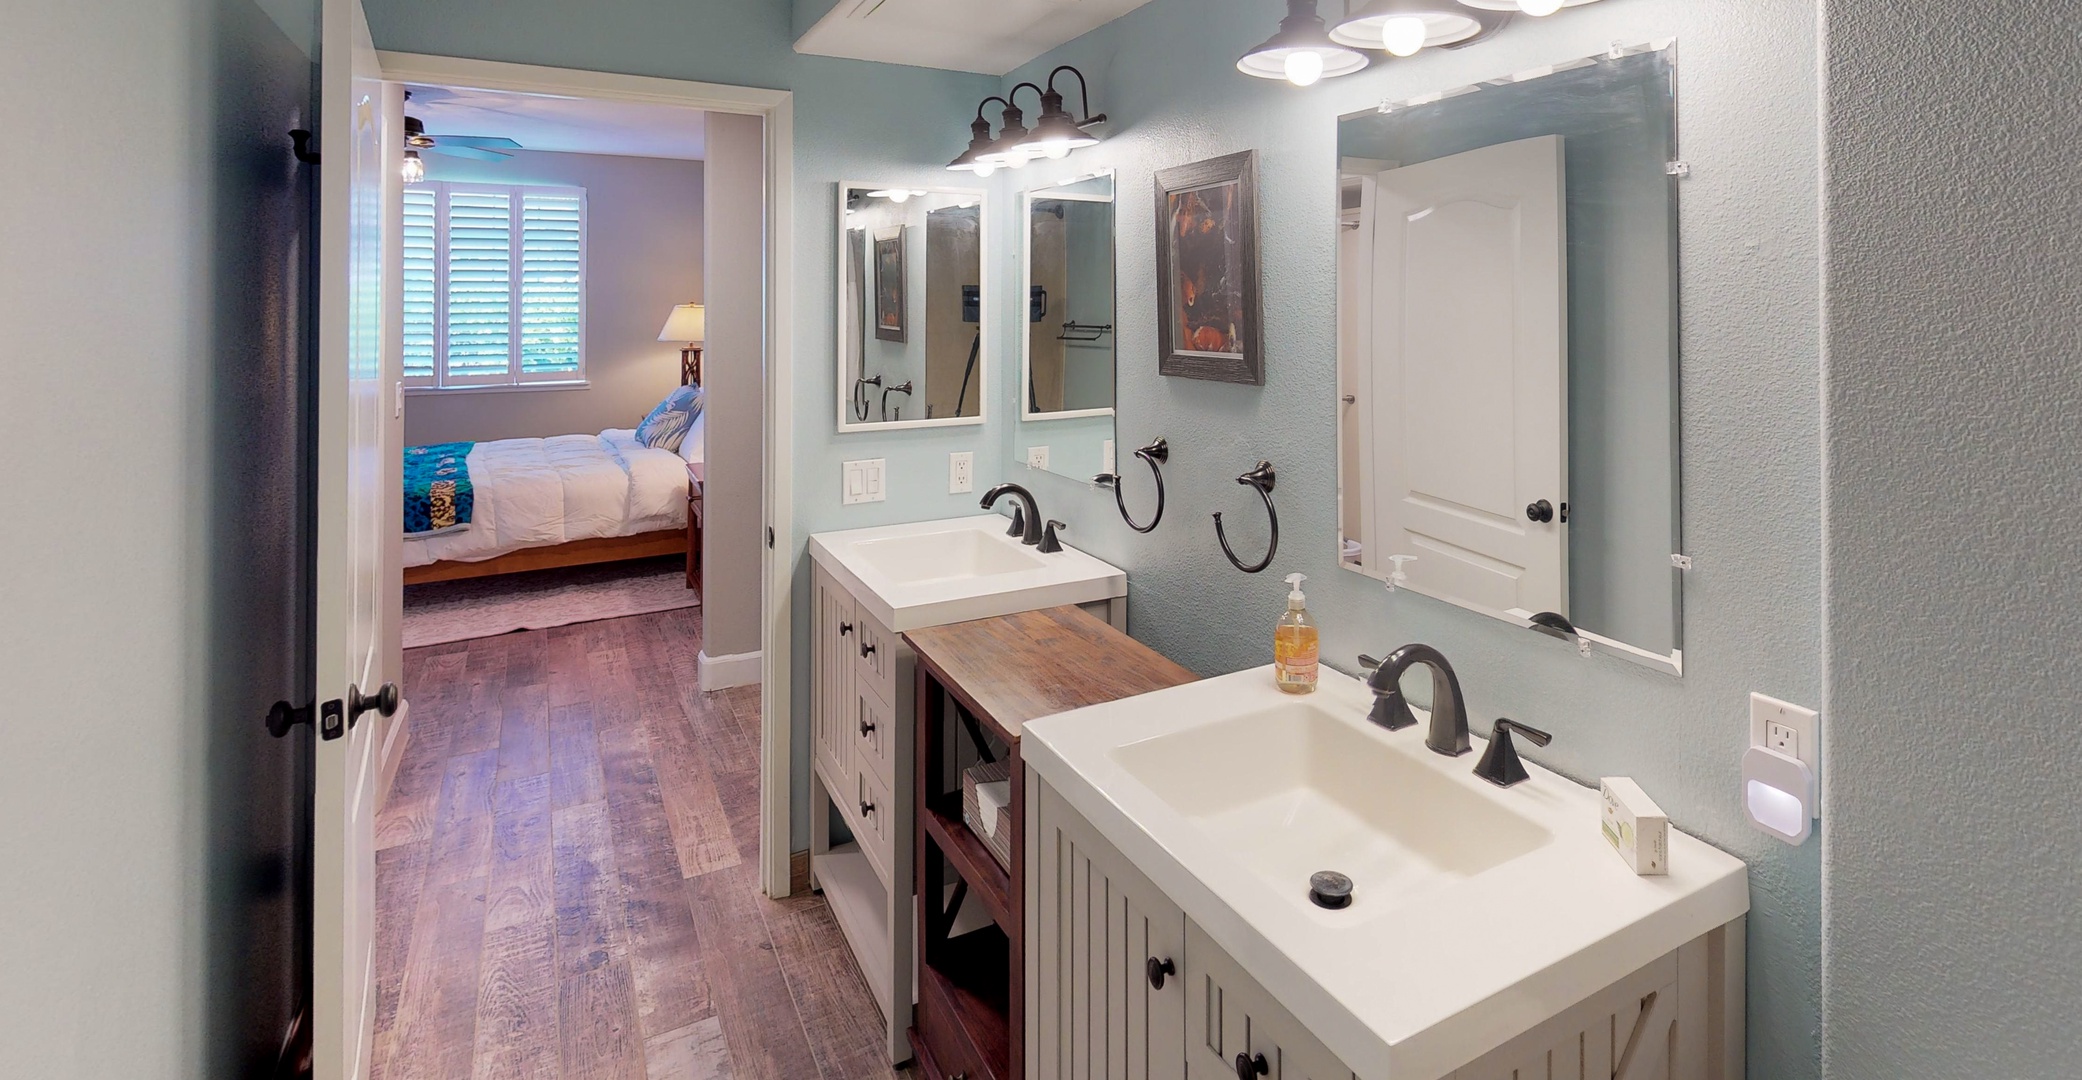 Kapolei Vacation Rentals, Ko Olina Kai 1051A - The primary guest bathroom with a stylish double vanity.